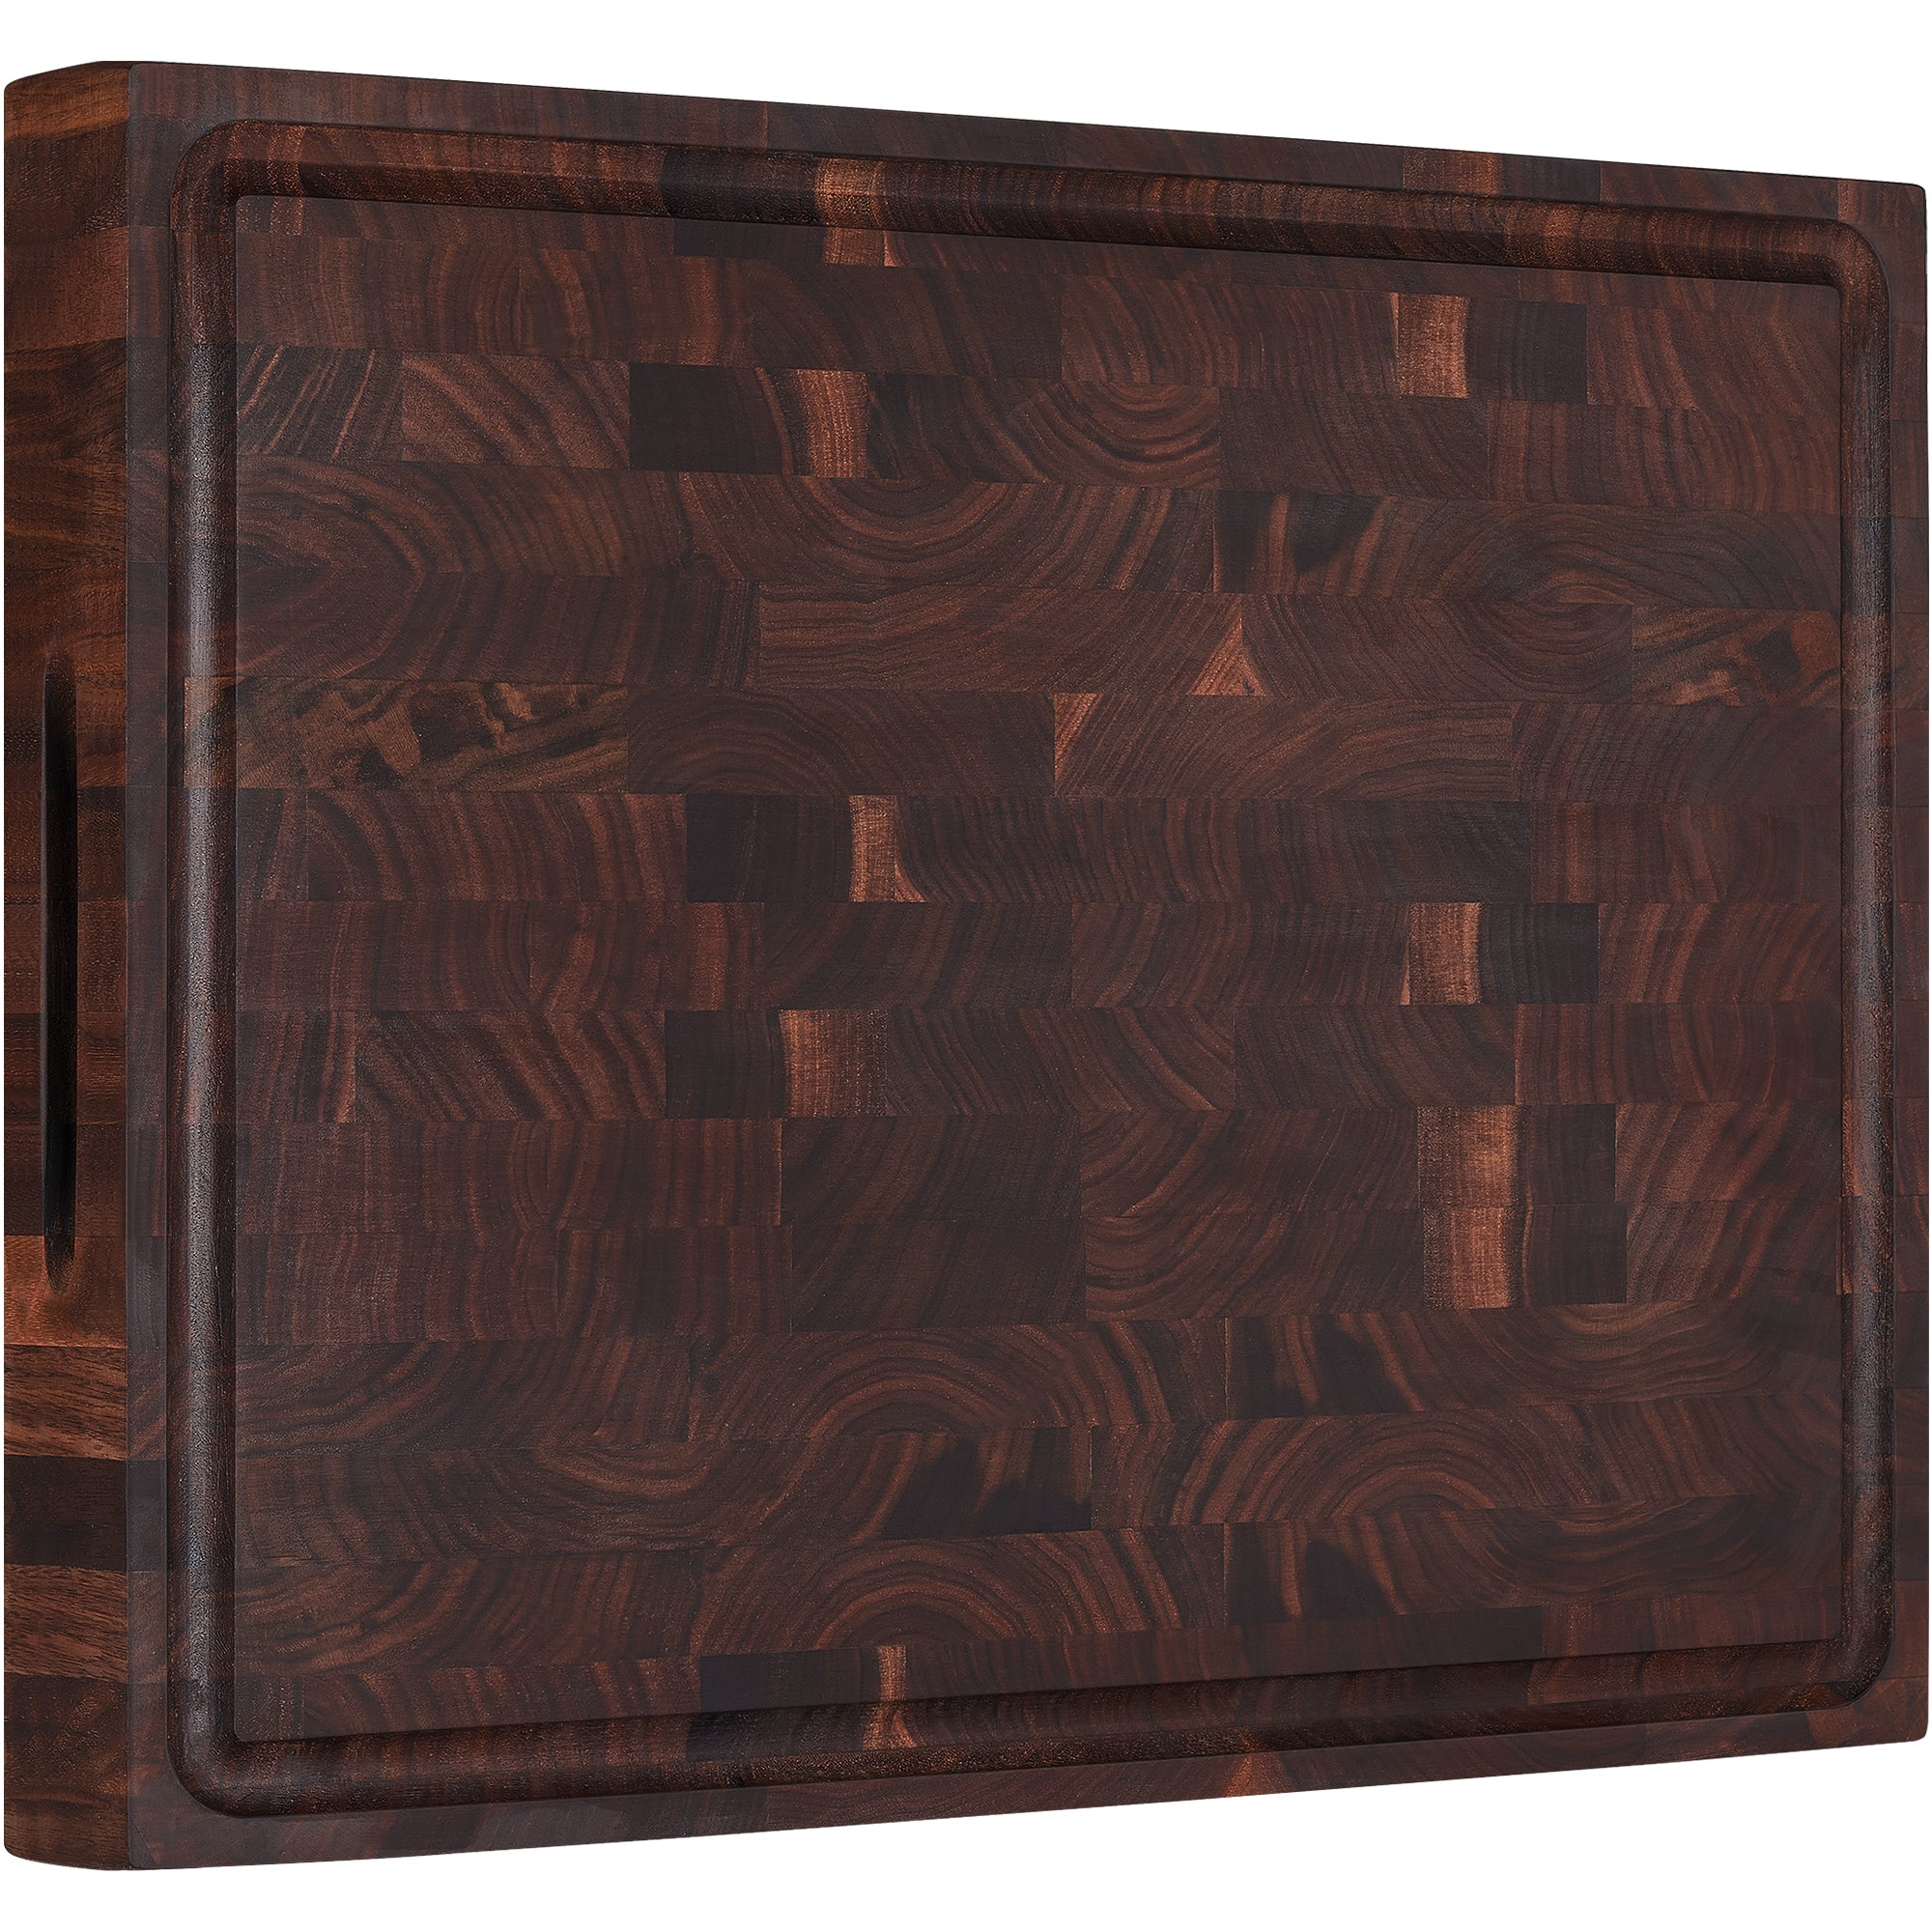 Ruvati 17 x 16 x 2 inch thick End-Grain American Walnut and Maple Chec -  HouseTie